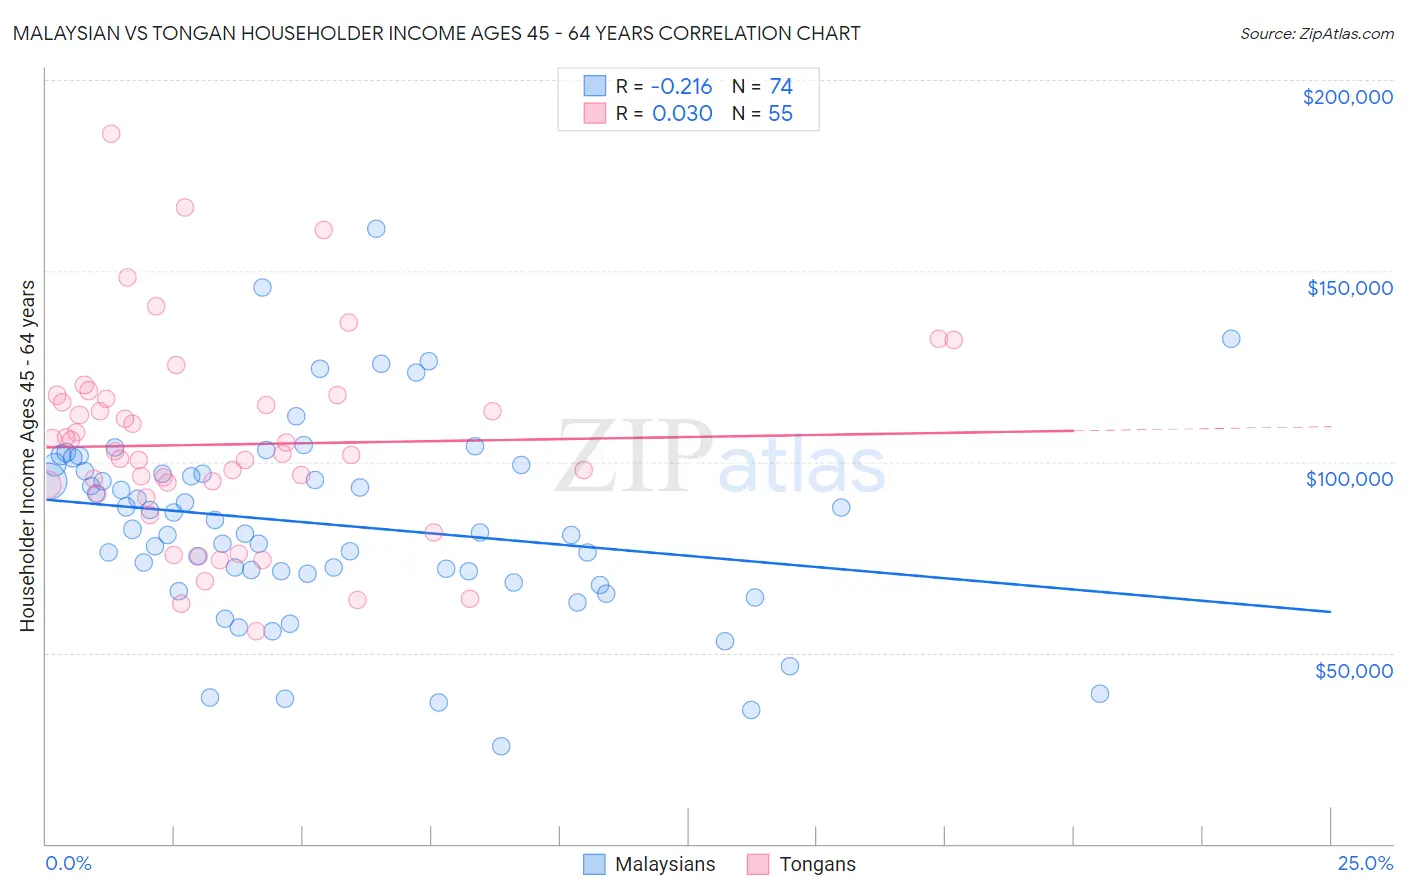 Malaysian vs Tongan Householder Income Ages 45 - 64 years